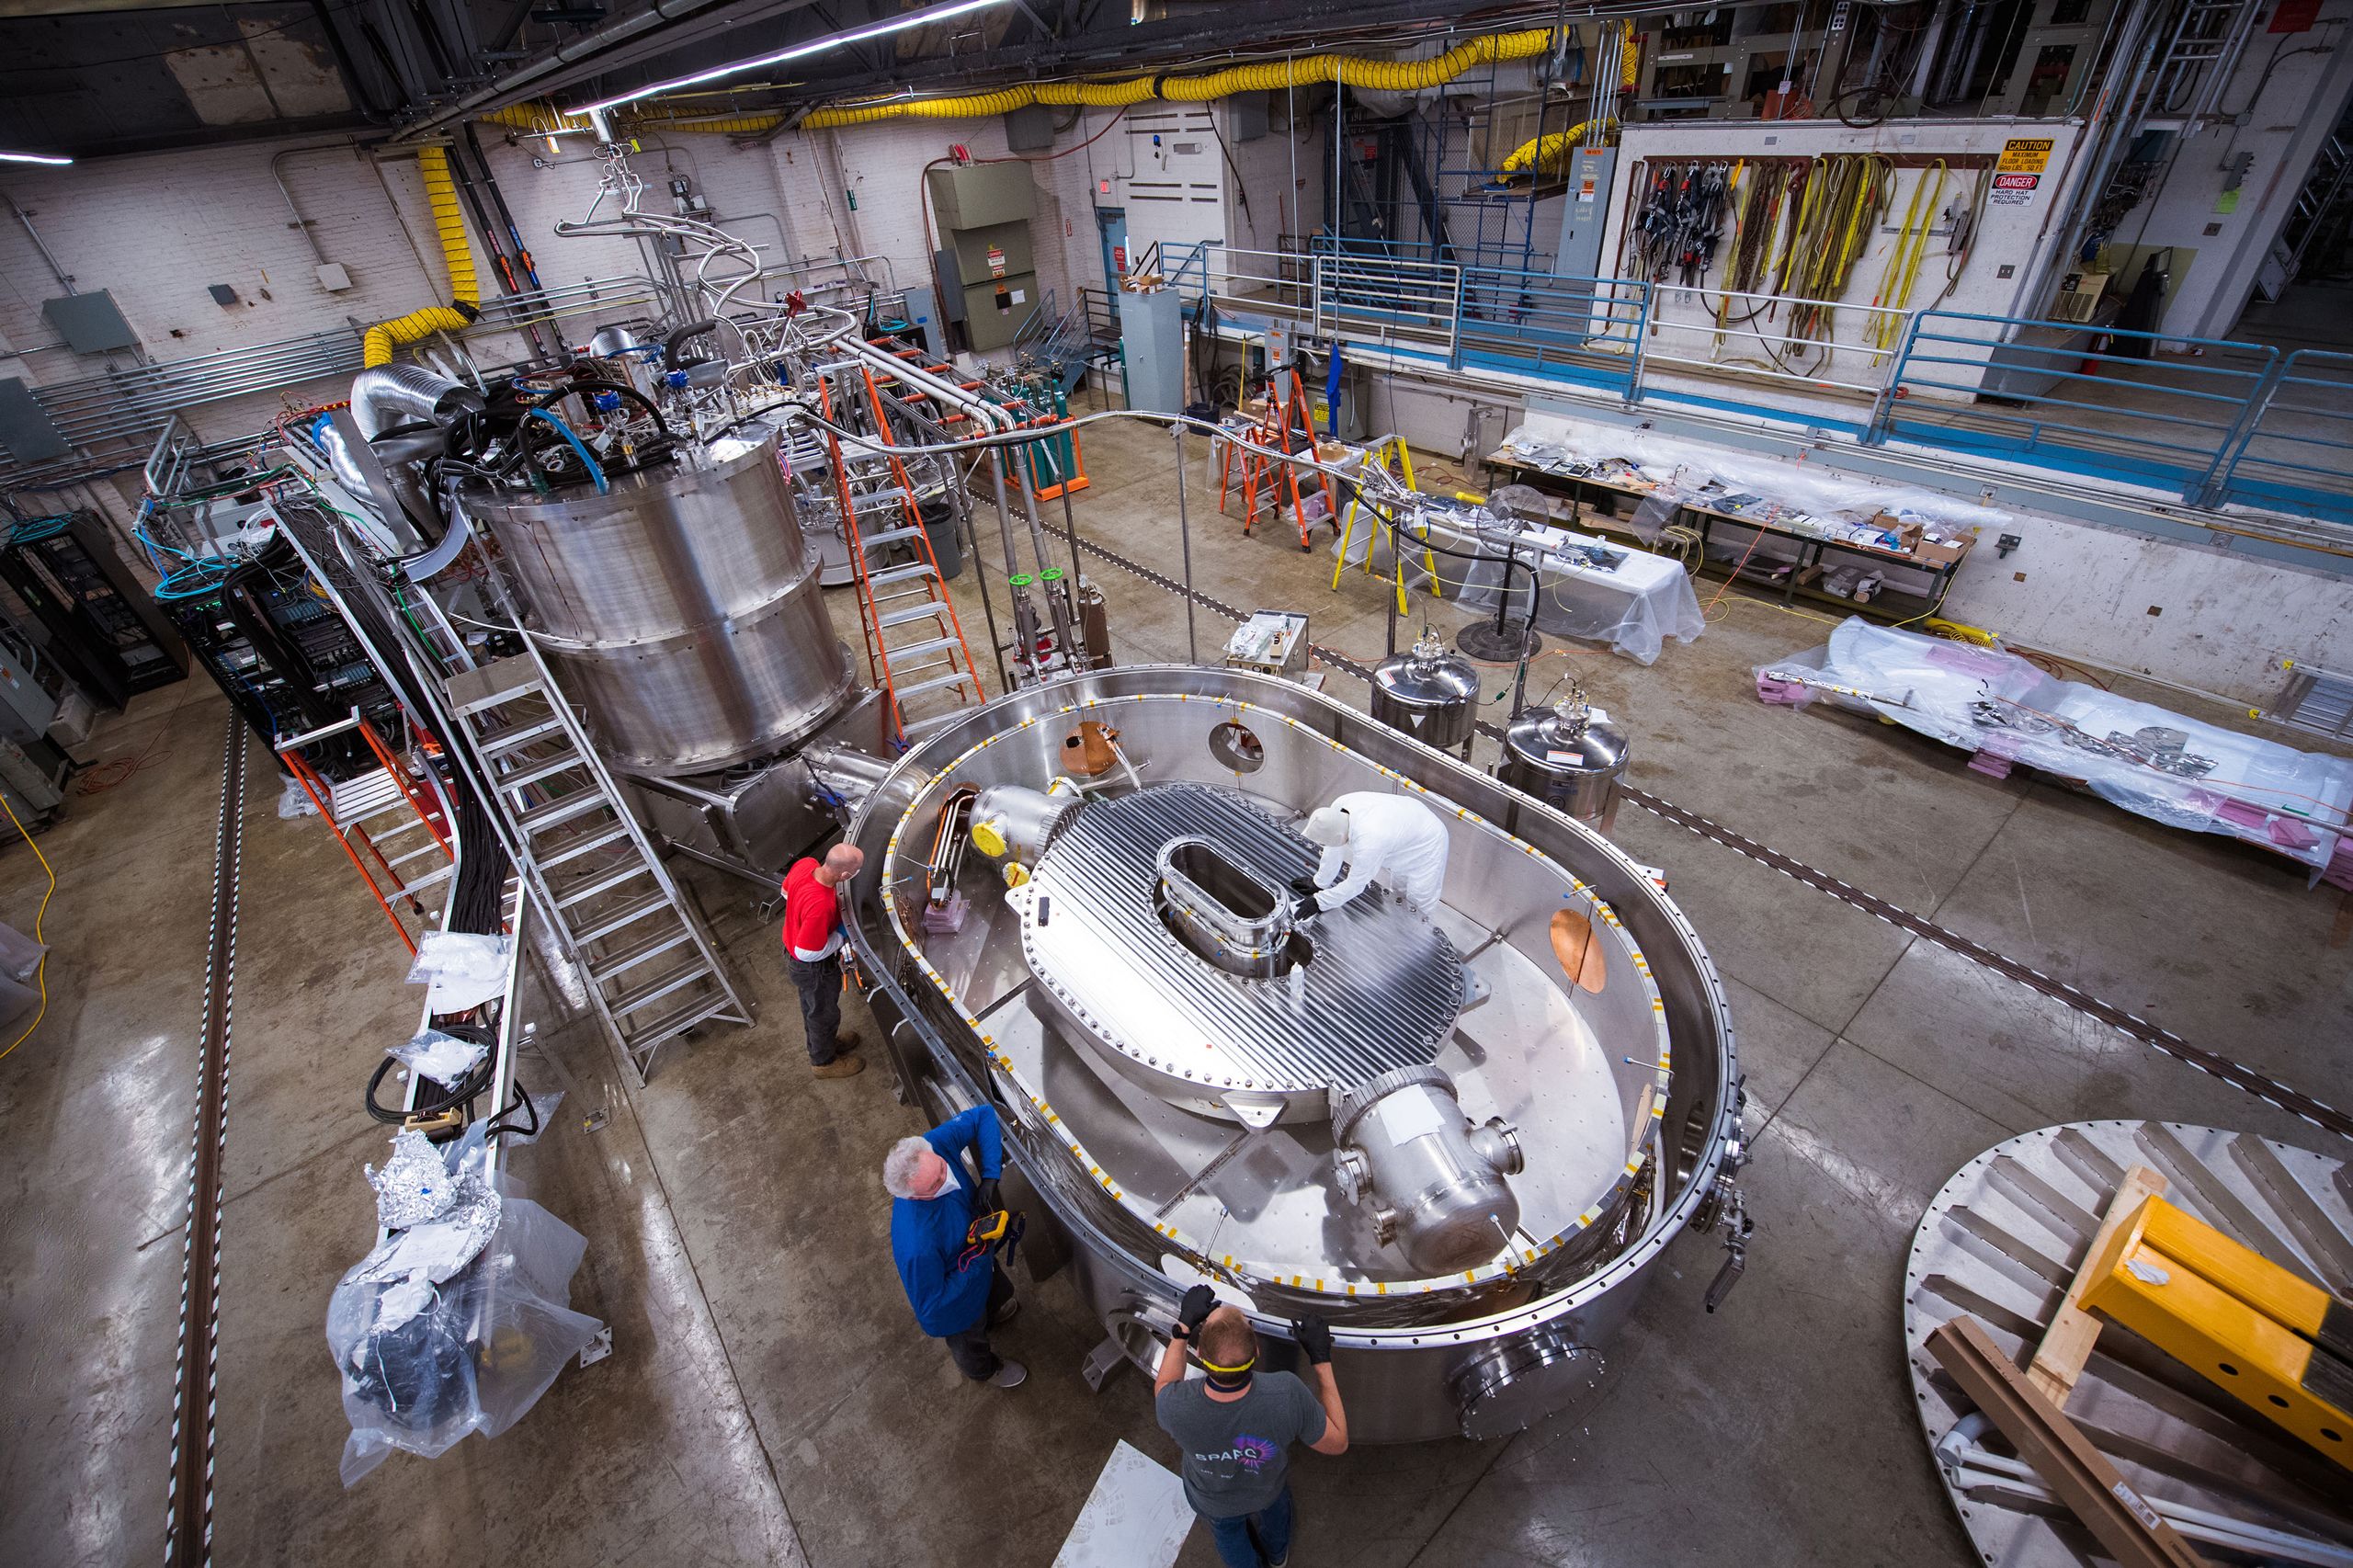 Aerial view of people working on a large-bore, full-scale high-temperature superconducting magnet designed and built by Commonwealth Fusion Systems and MIT’s Plasma Science and Fusion Center